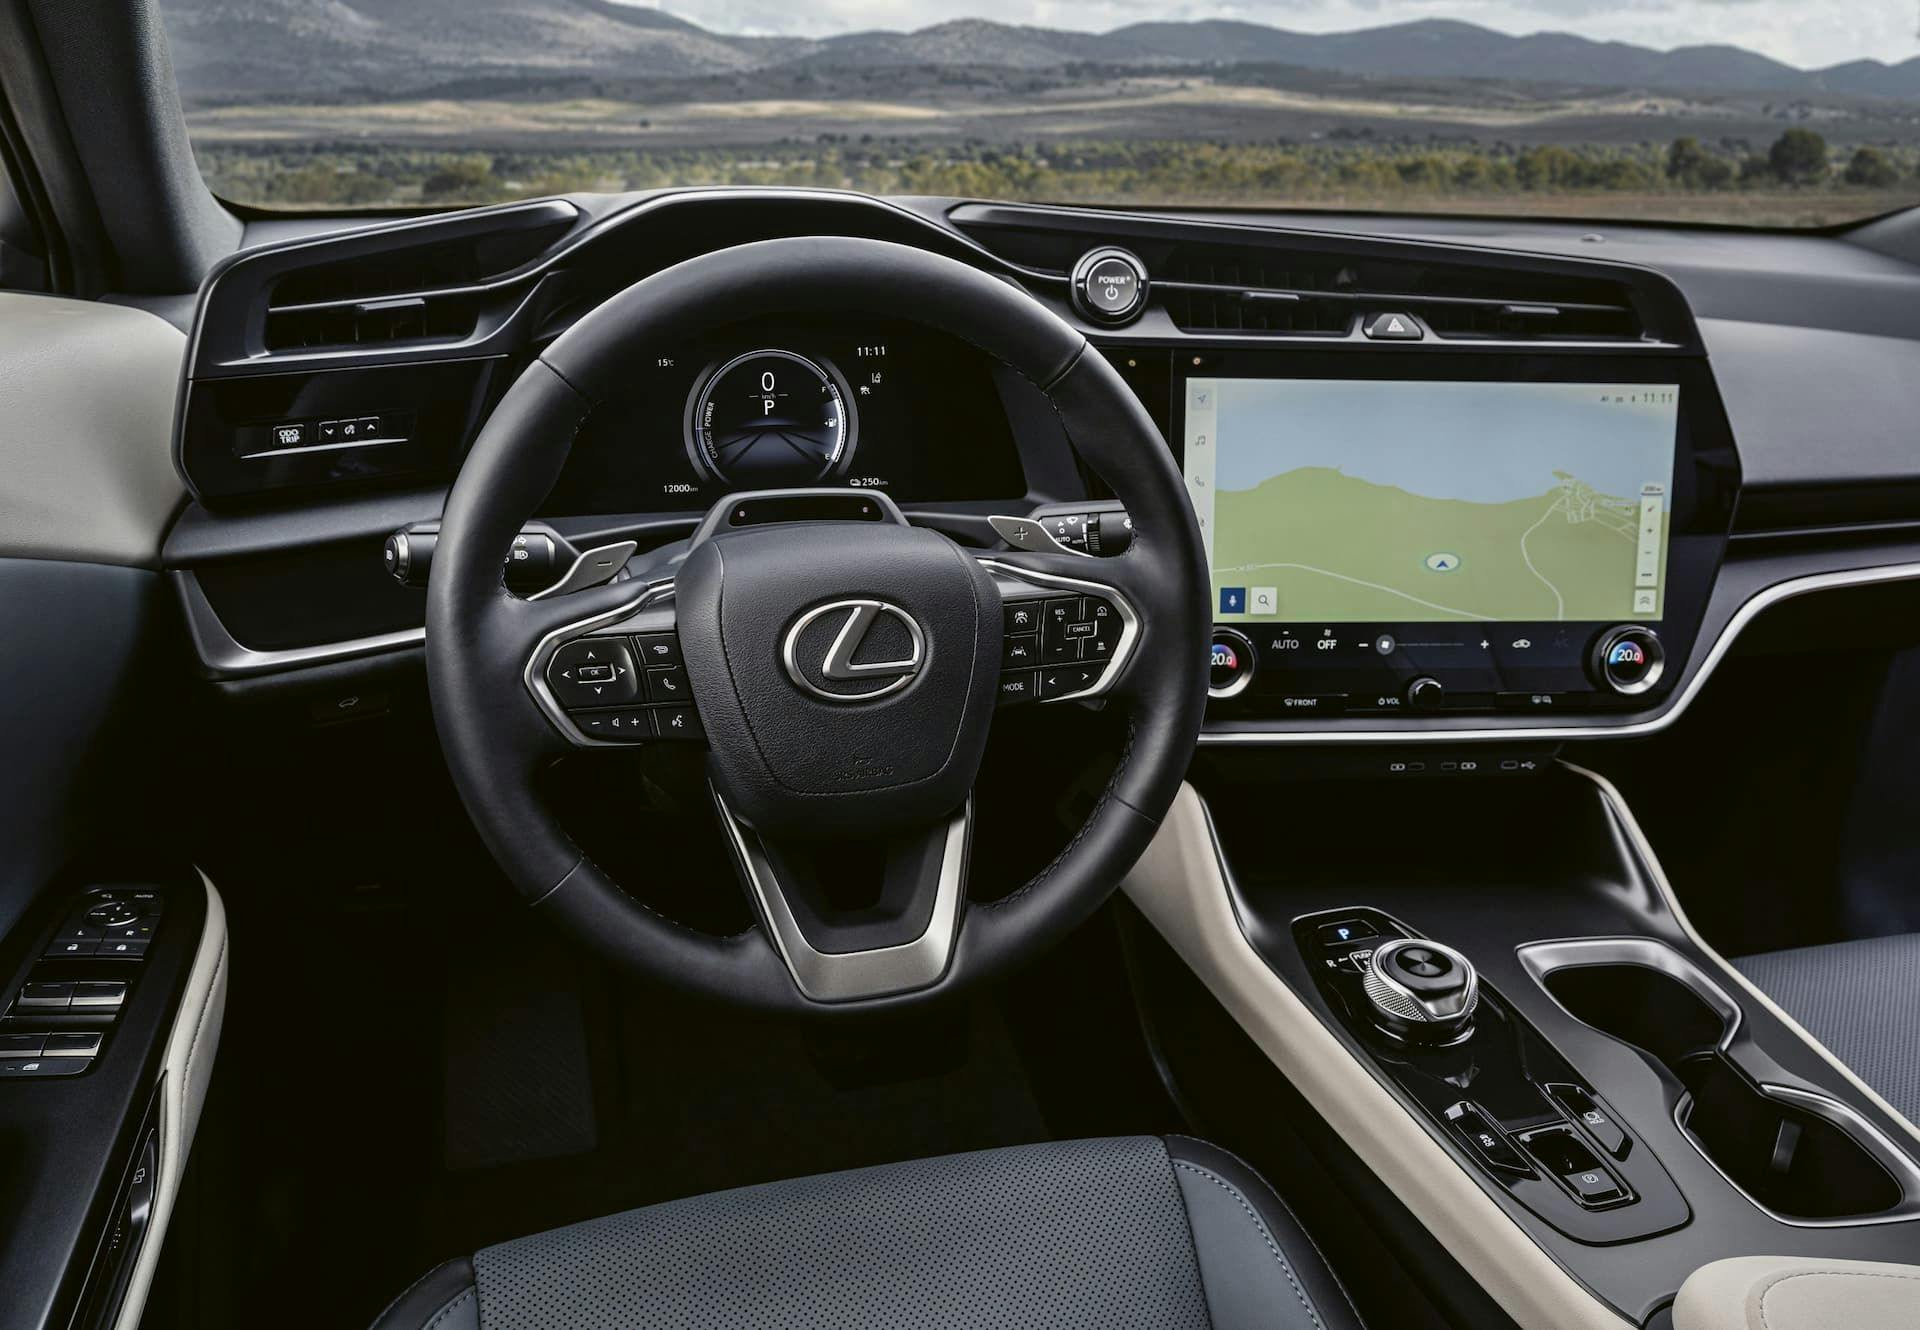 Lexus RZ interior with three-spoke steering wheel and touchscreen displaying map